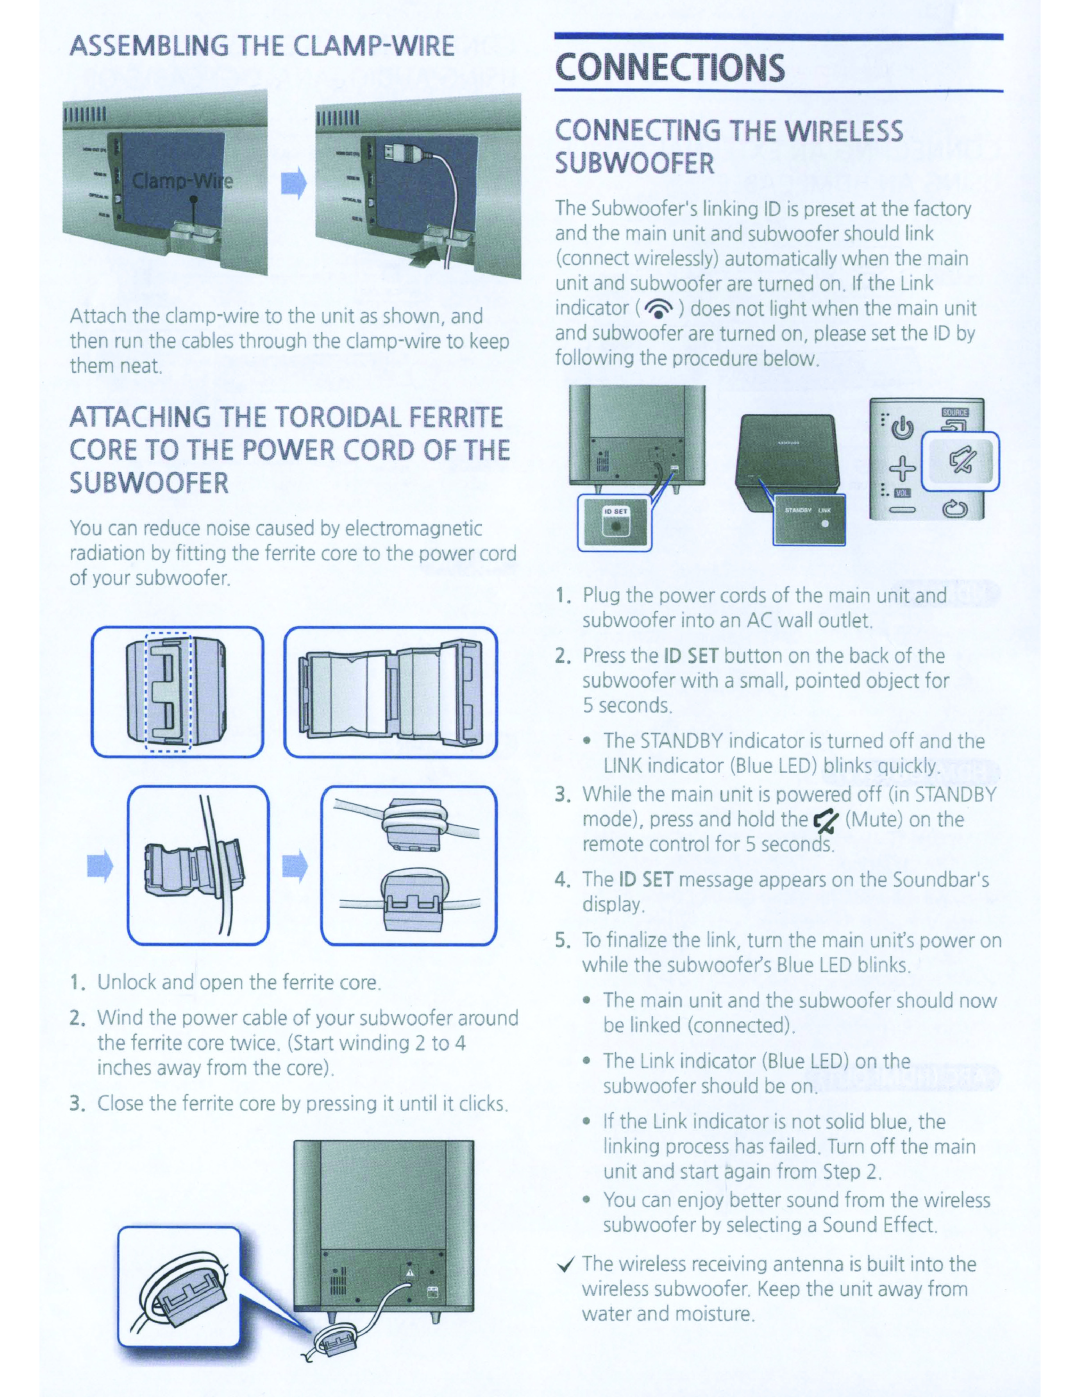 Samsung HWH7500 user manual Connections, ASSEMBliNG THE CLAMP-WIRE, Connecting The Wireless Subwoofer, ·!,.......~ 